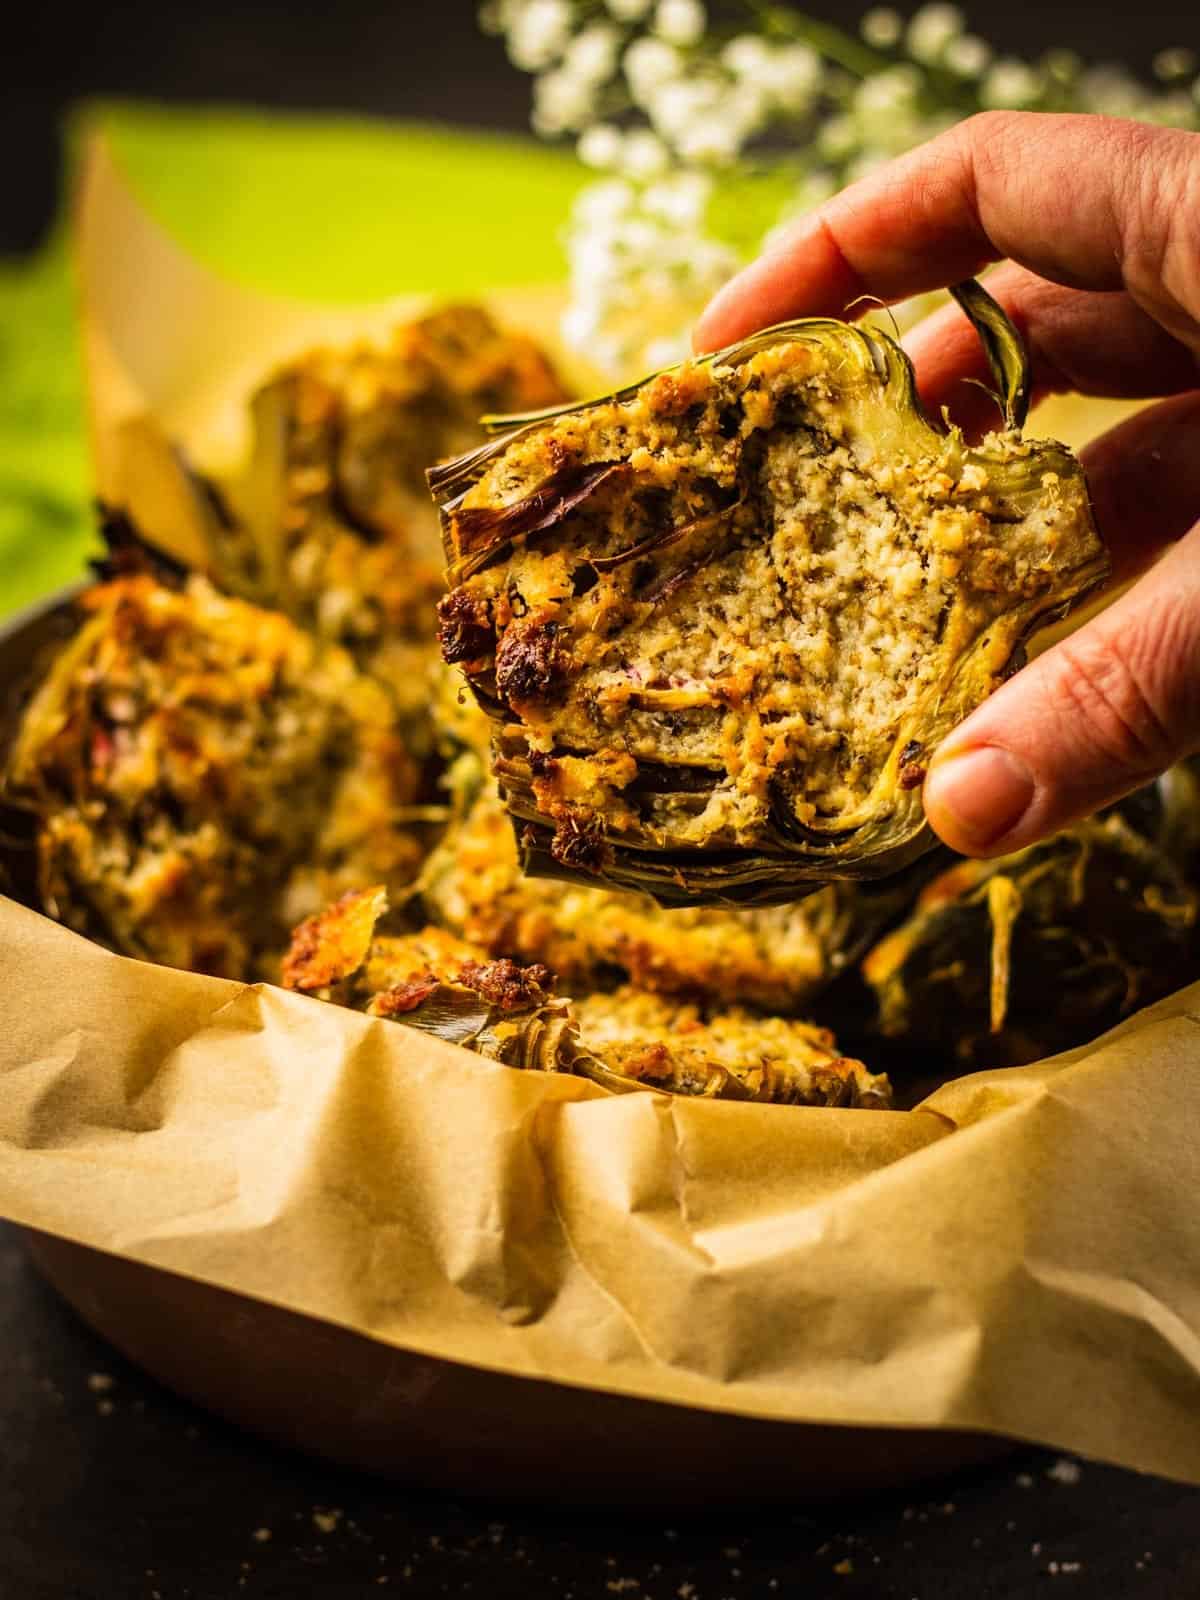 hand grabbing a parmesan crusted roasted artichoke half out of a basket lined with parchment